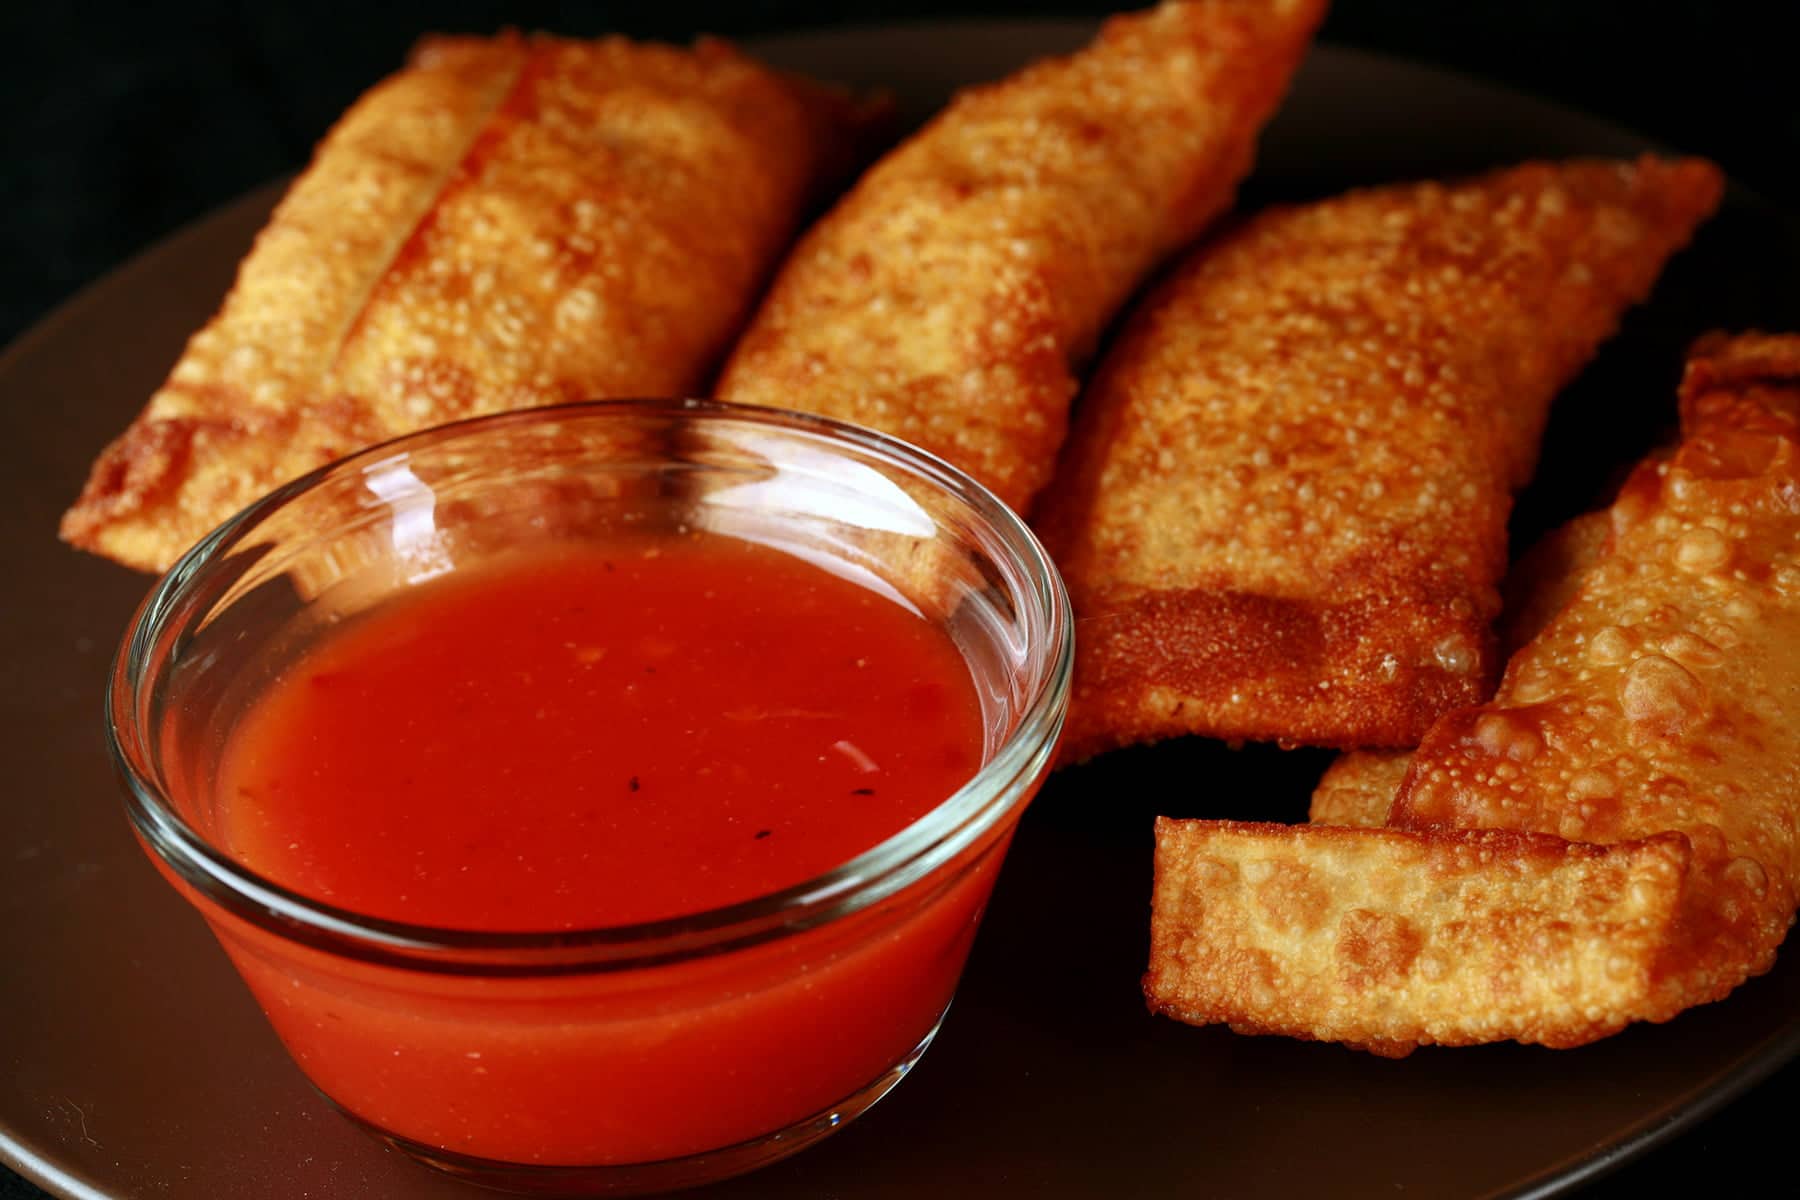 A small glass bowl of deeply orange plum sauce is in the foreground, with several egg rolls behind it.